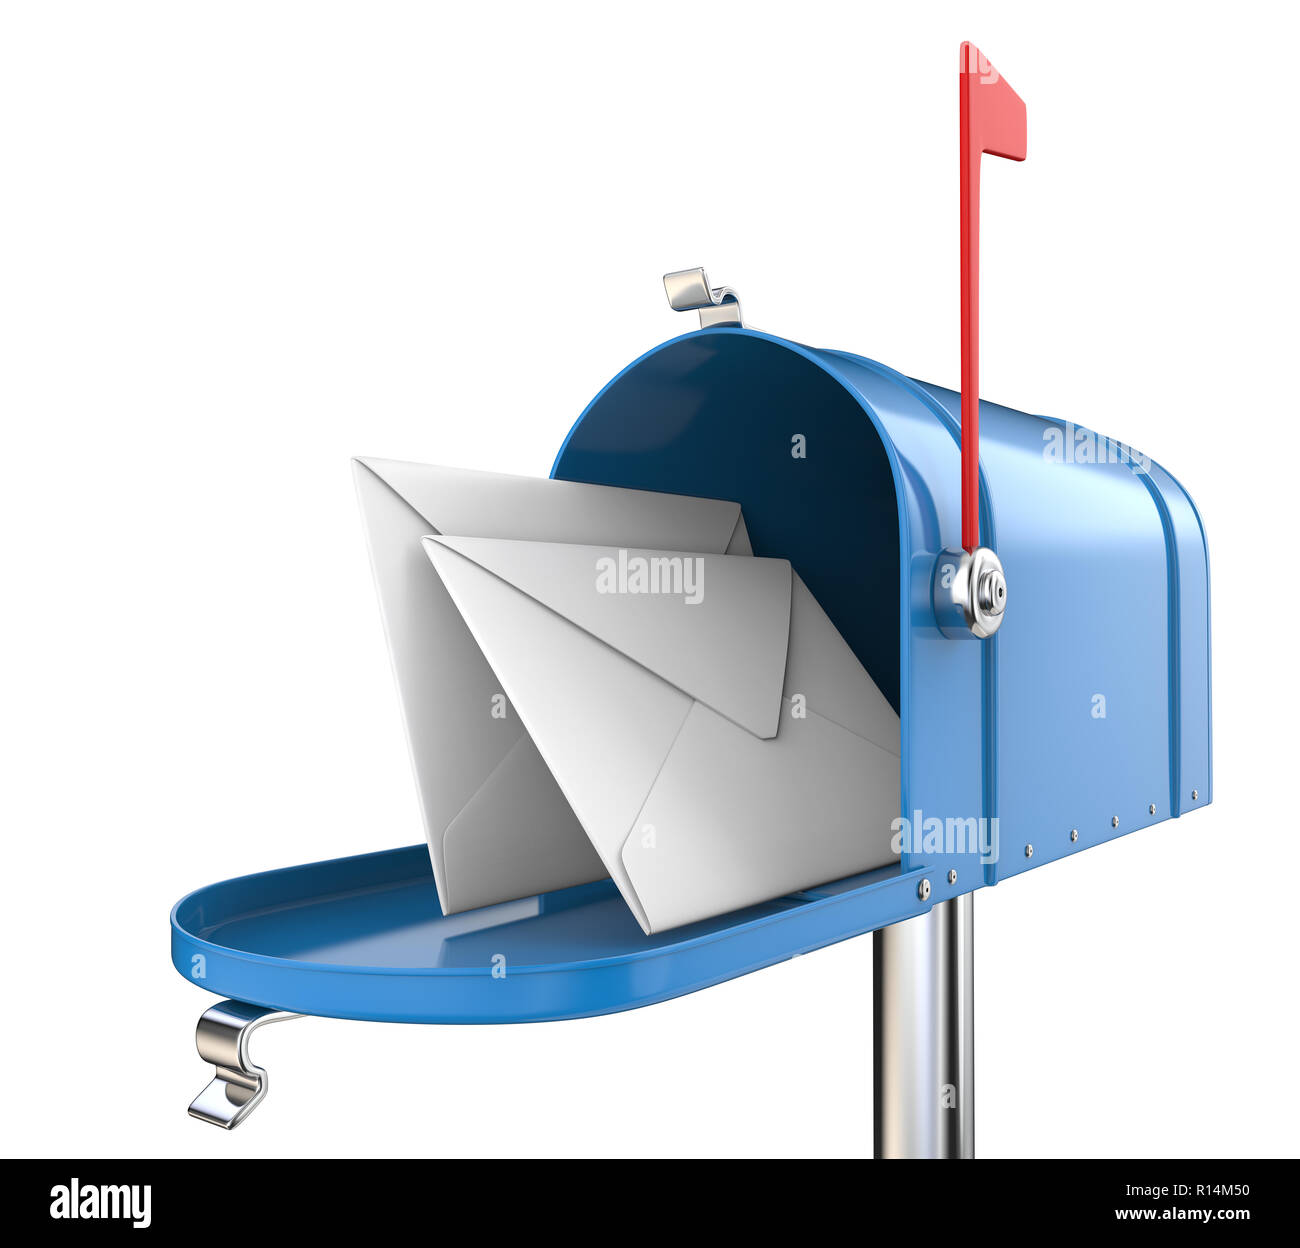 Blue Mailbox, open with 2 envelopes. Isolated on white background. 3D render. Stock Photo